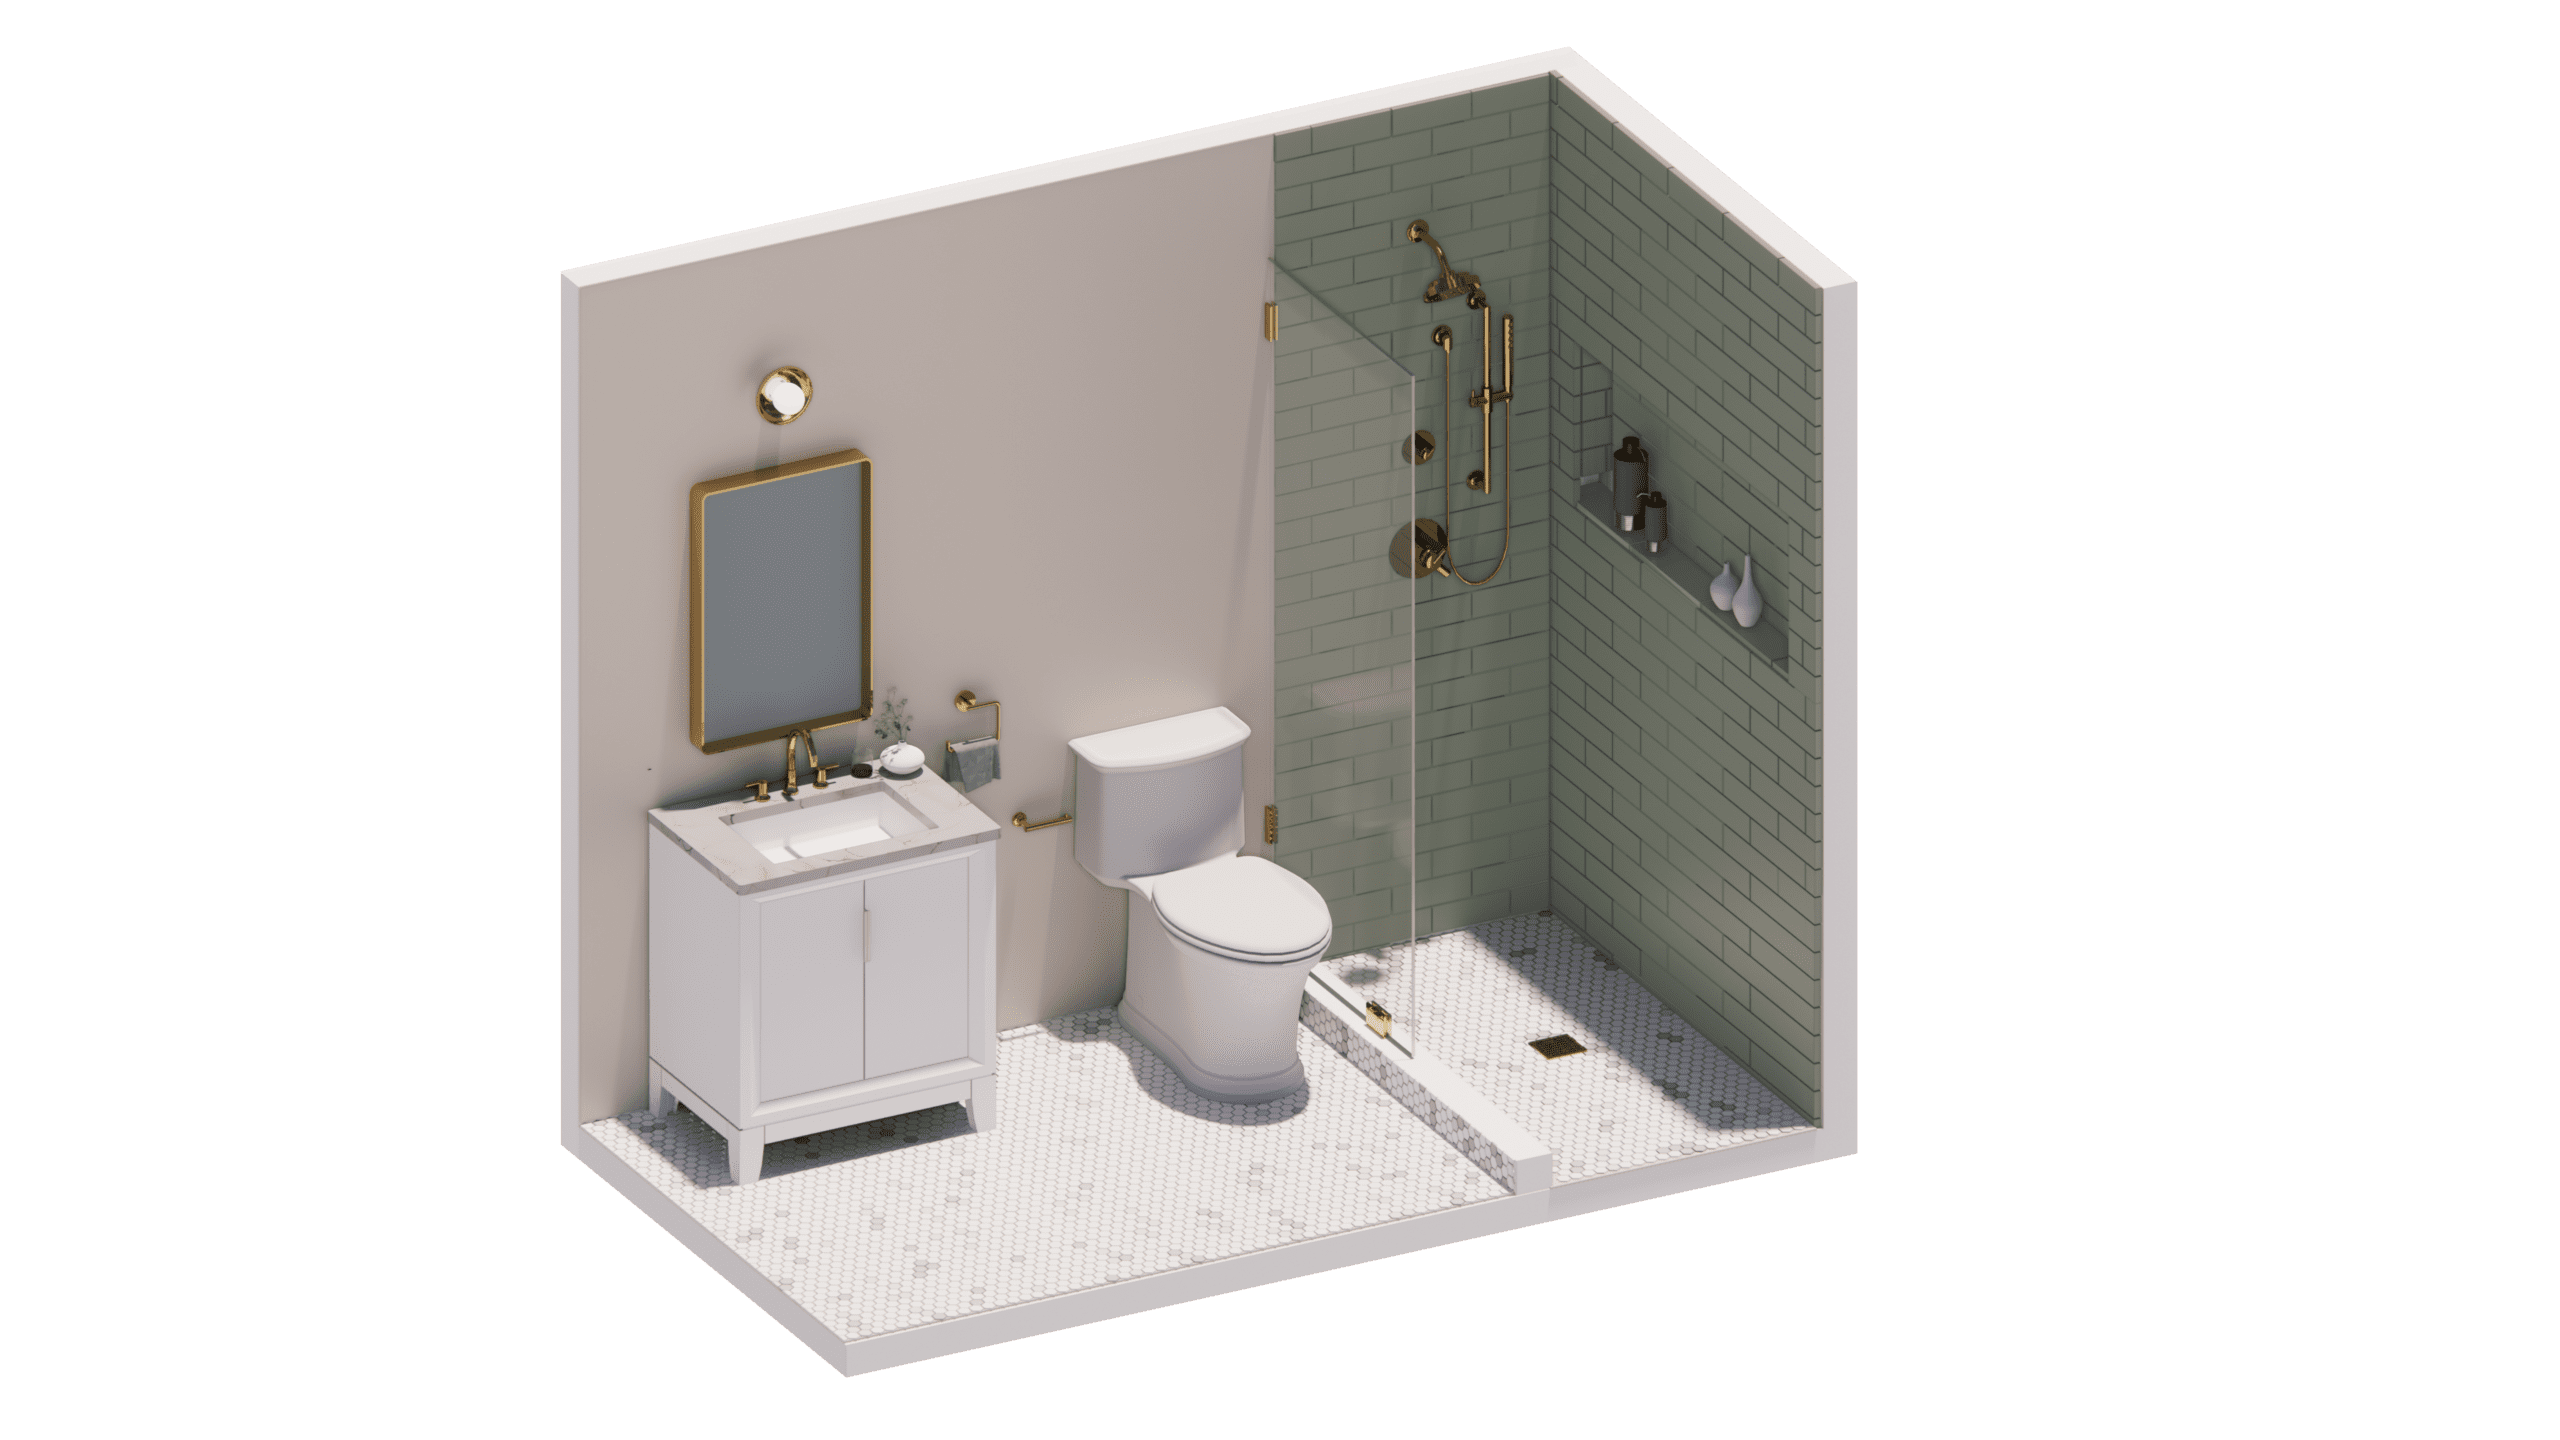 The joule - NOMI Guest bathroom remodel collection